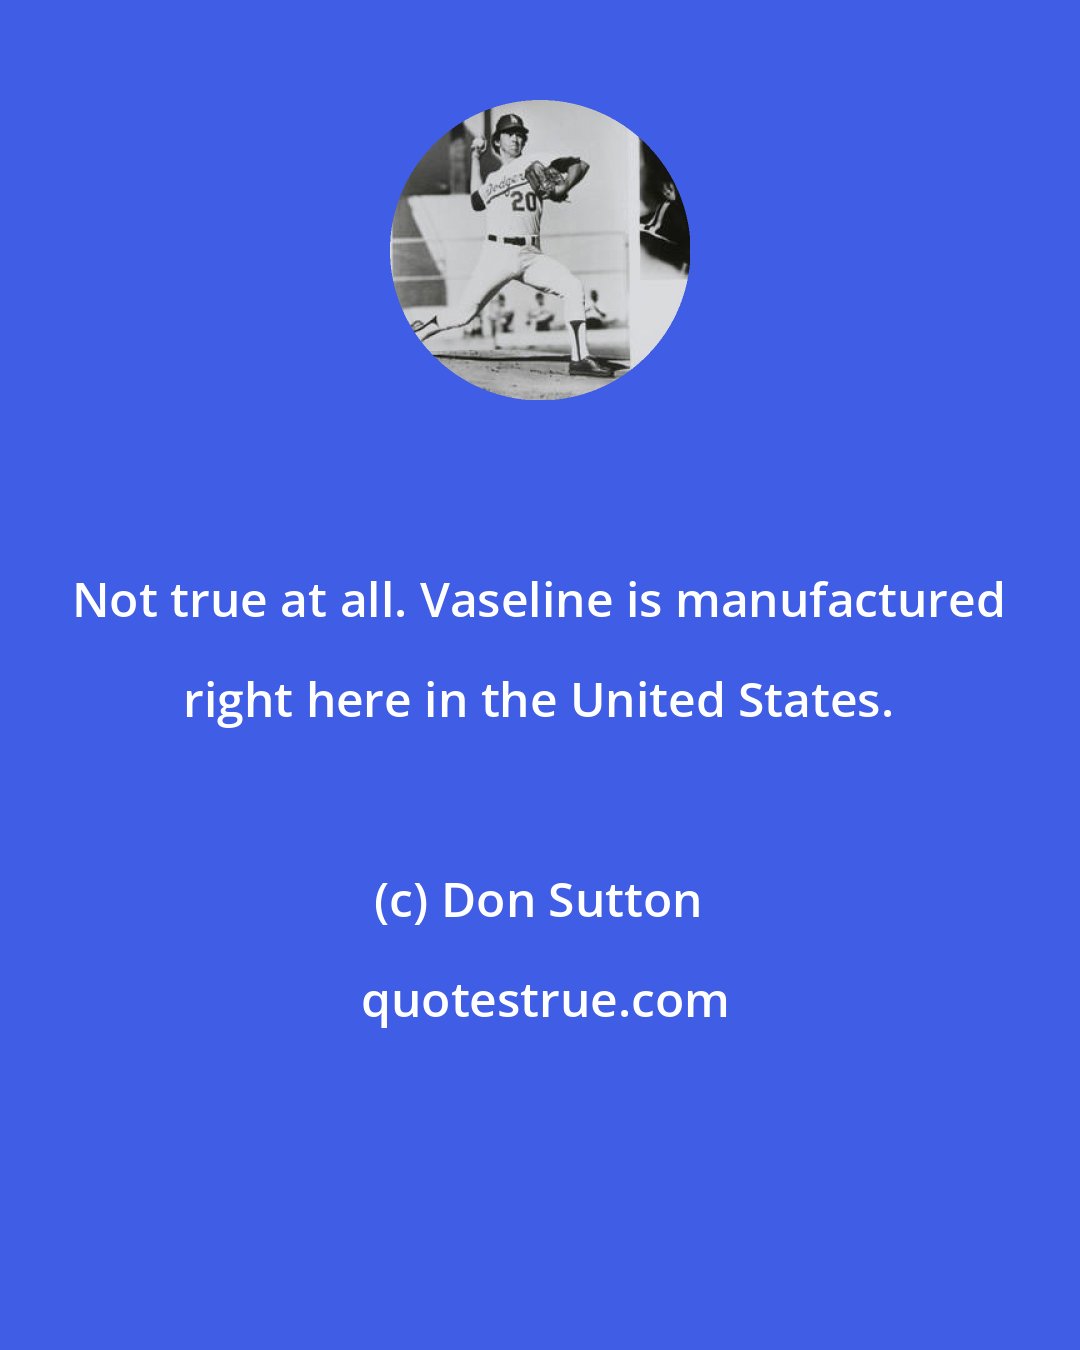 Don Sutton: Not true at all. Vaseline is manufactured right here in the United States.